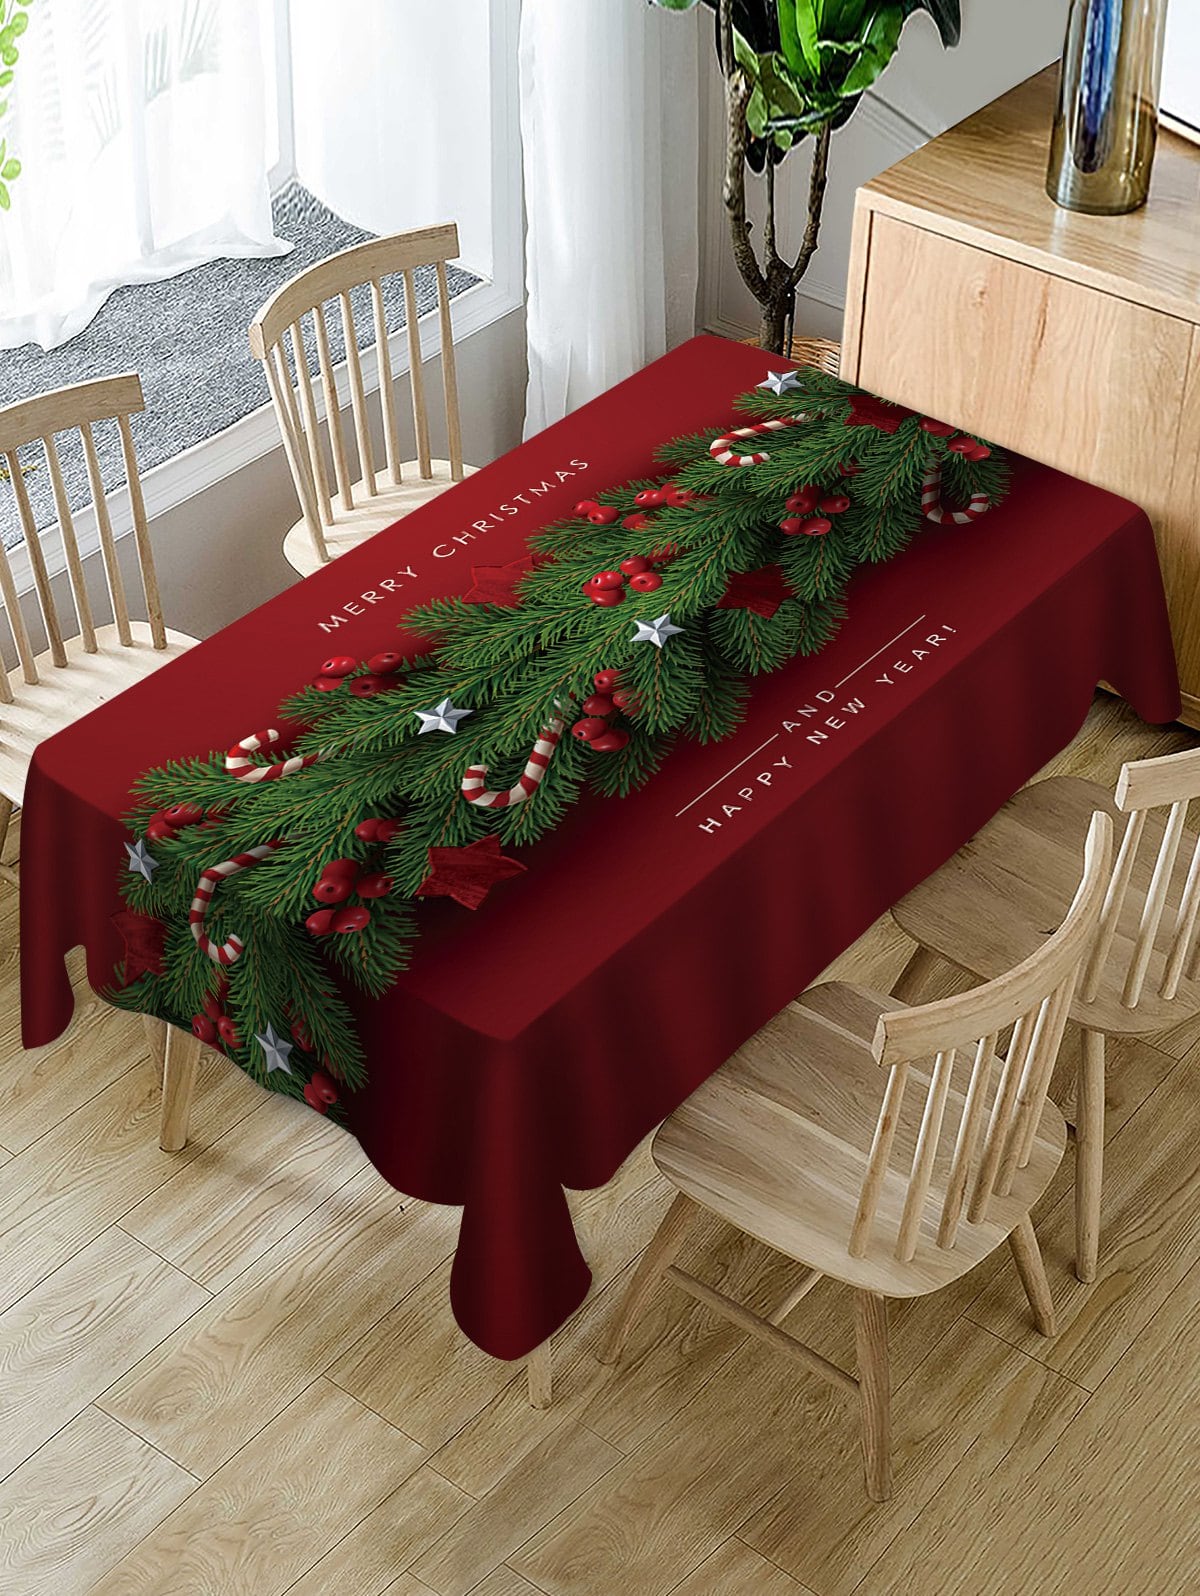 Merry Christmas Candy Cane Fabric Waterproof Table Cloth